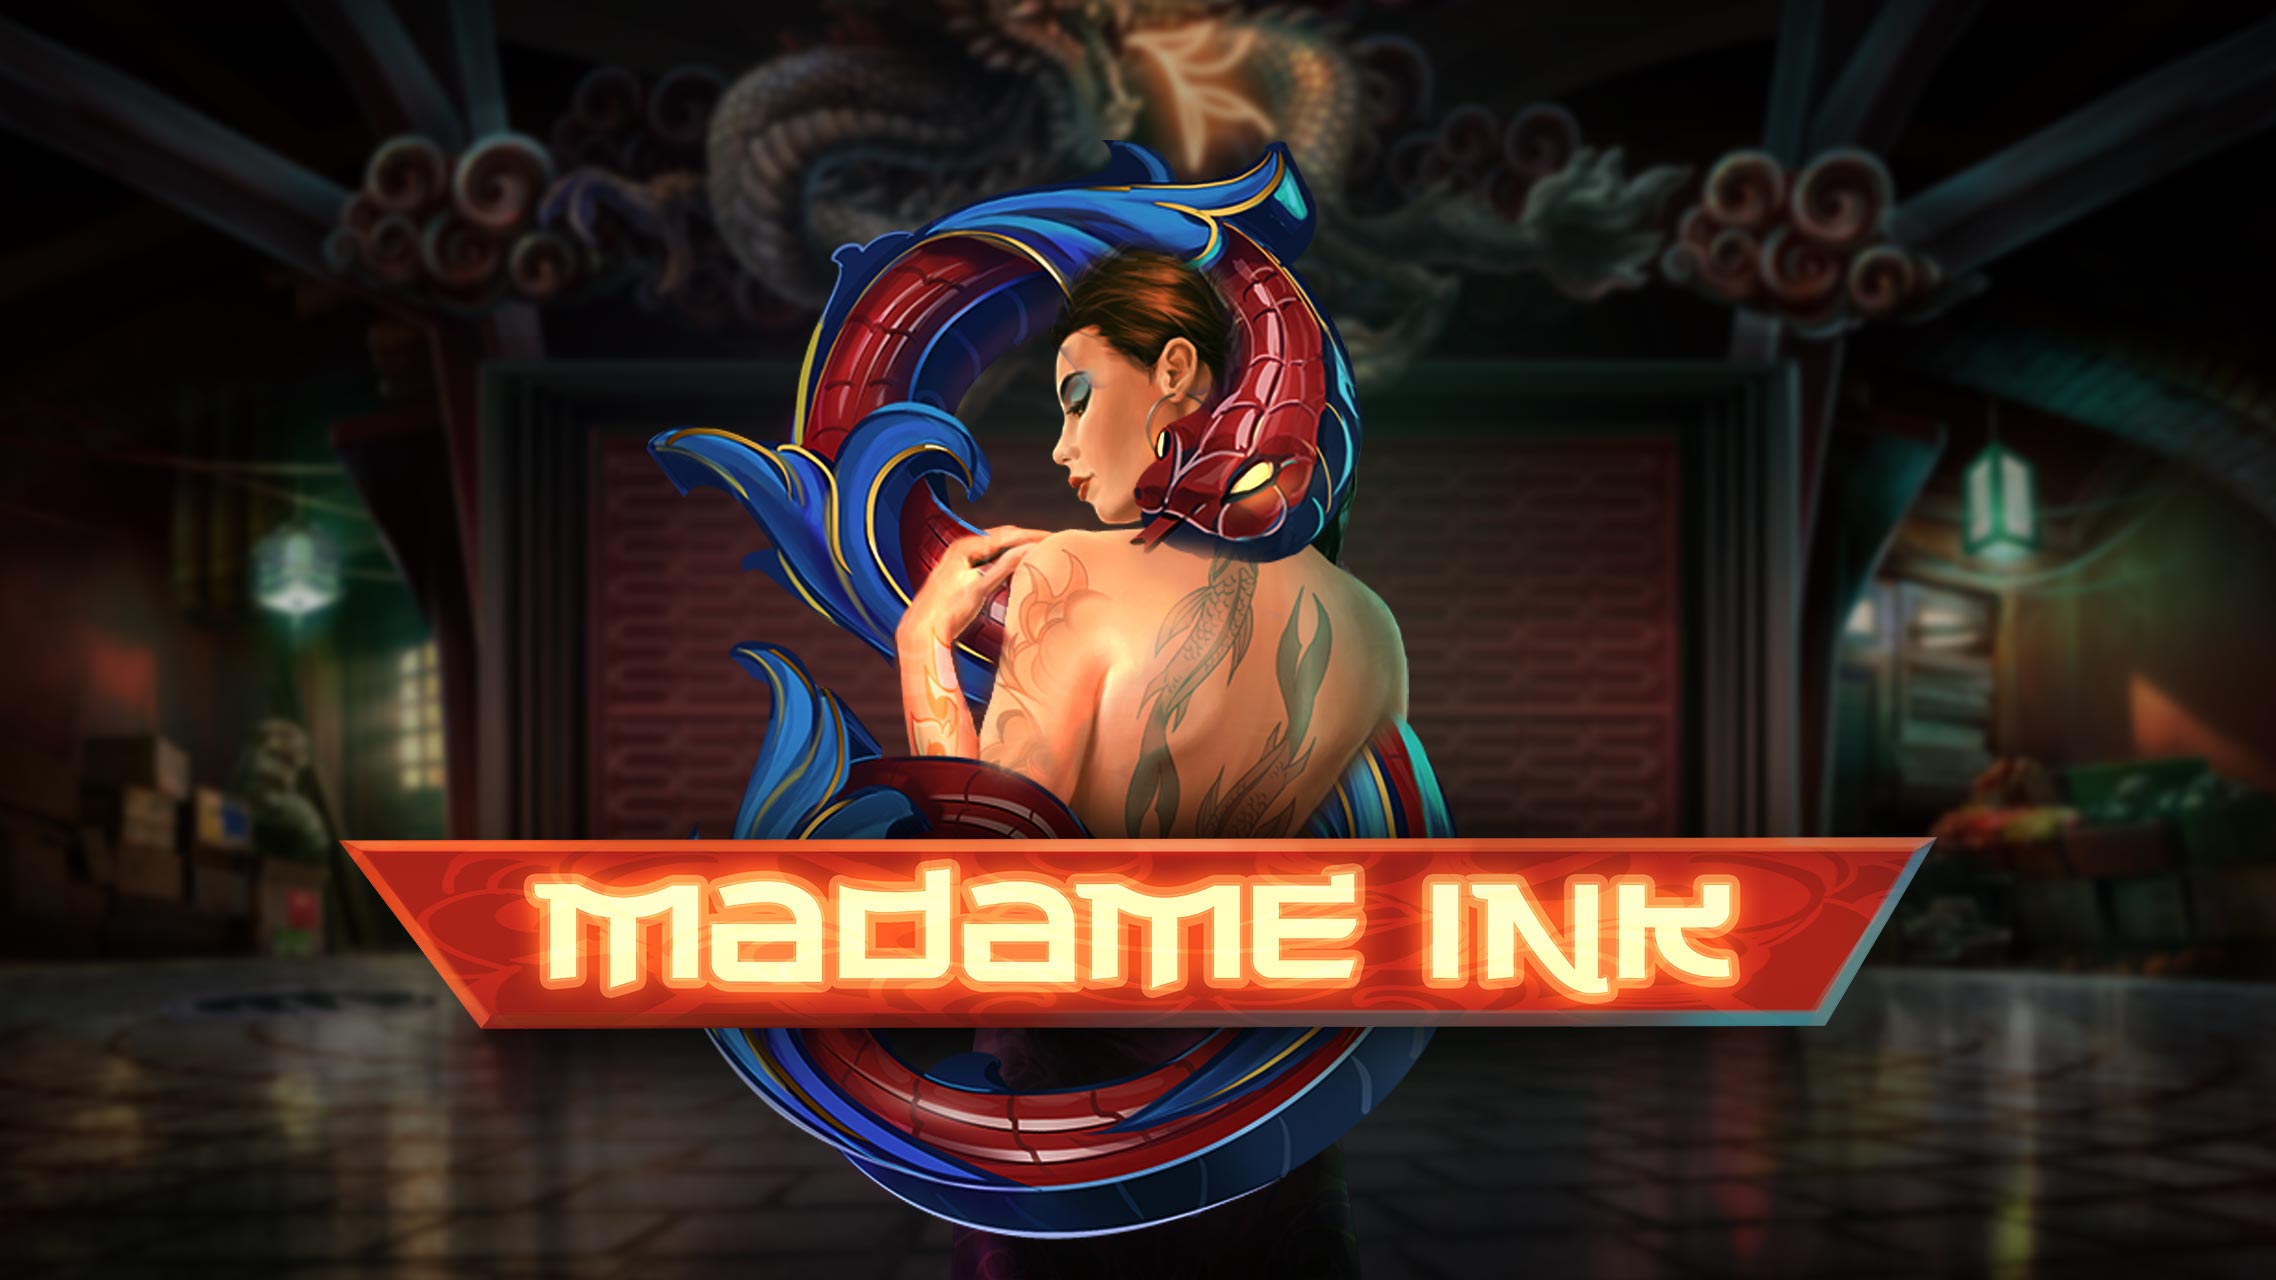 madame-ink-playn-gos-latest-slot-game-gets-inspiration-from-real-tattoo-designs